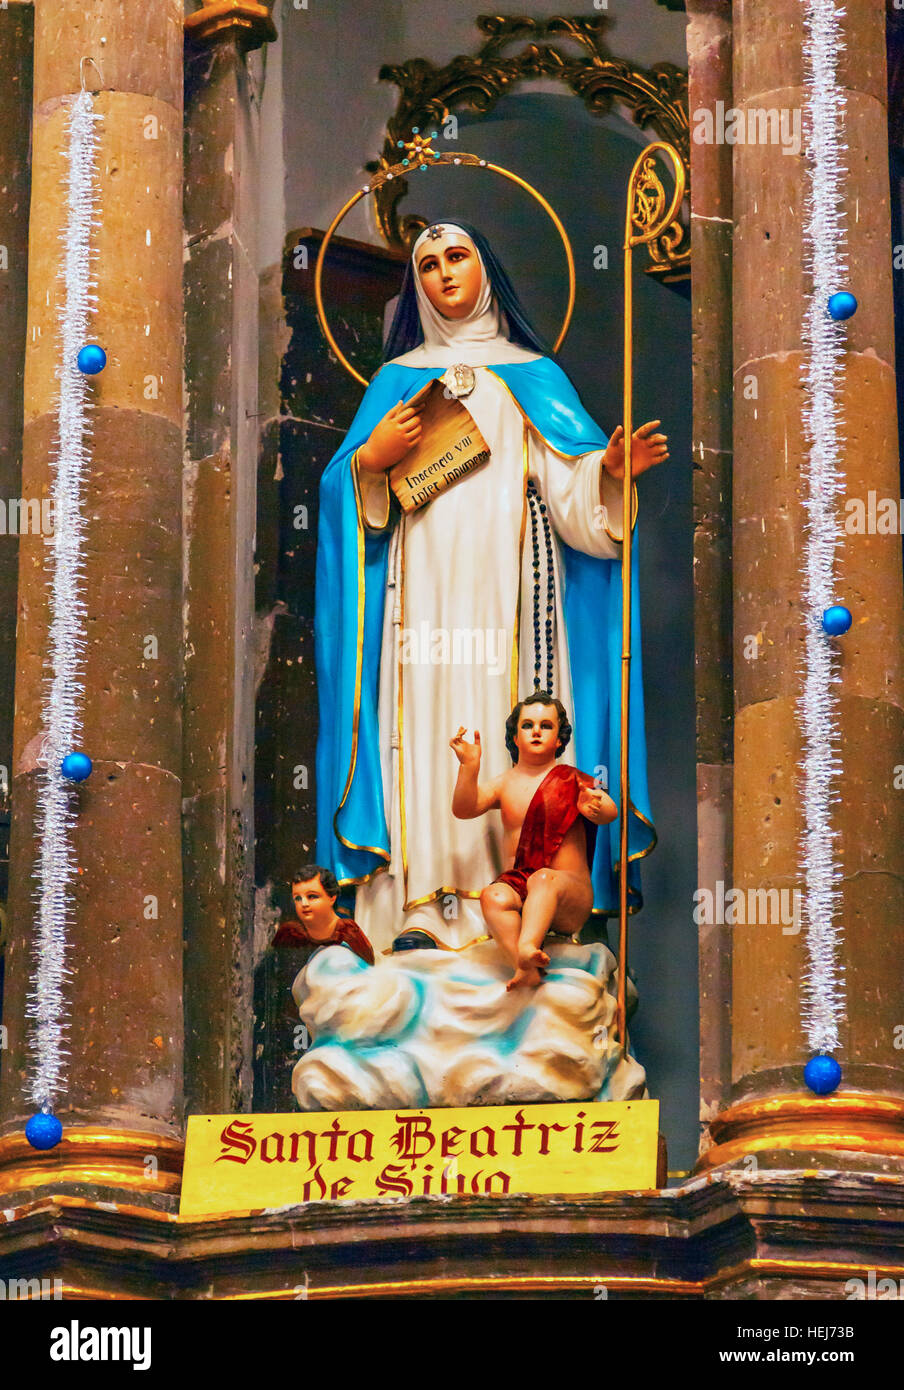 Saint Beatrice Statue Founder Order Convent Immaculate Conception The Nuns San Miguel de Allende, Mexico. Stock Photo